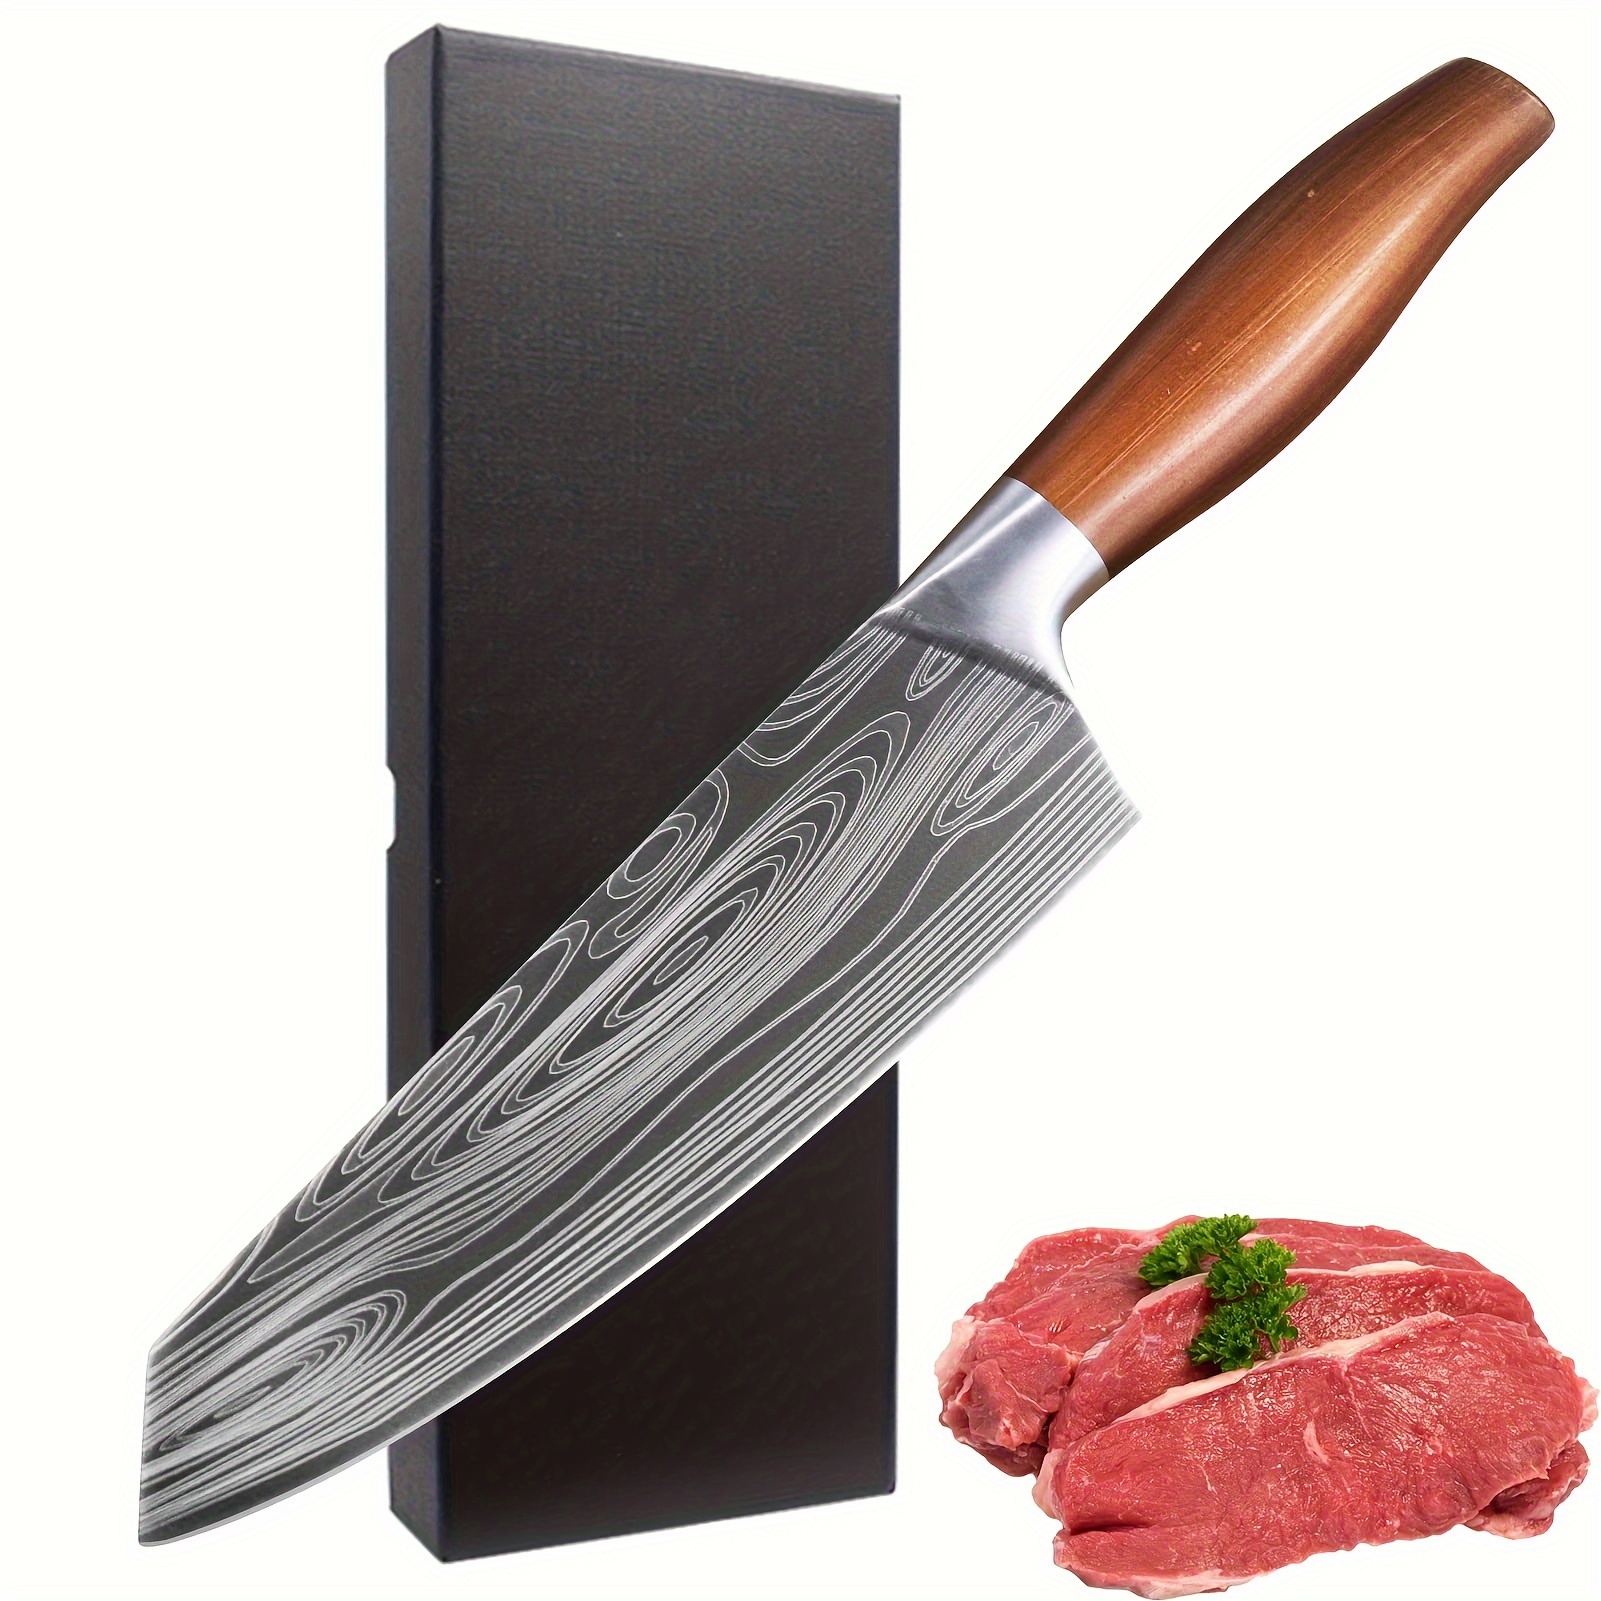 

1pc Professional Kitchen Knives Slicing Knife Knives High Carbon Stainless Steel Kitchen Boning Knives Slaughter Special Butcher Meat Knife For Bone Meat Kitchen Gadgets Gifts For Mom Or Dad